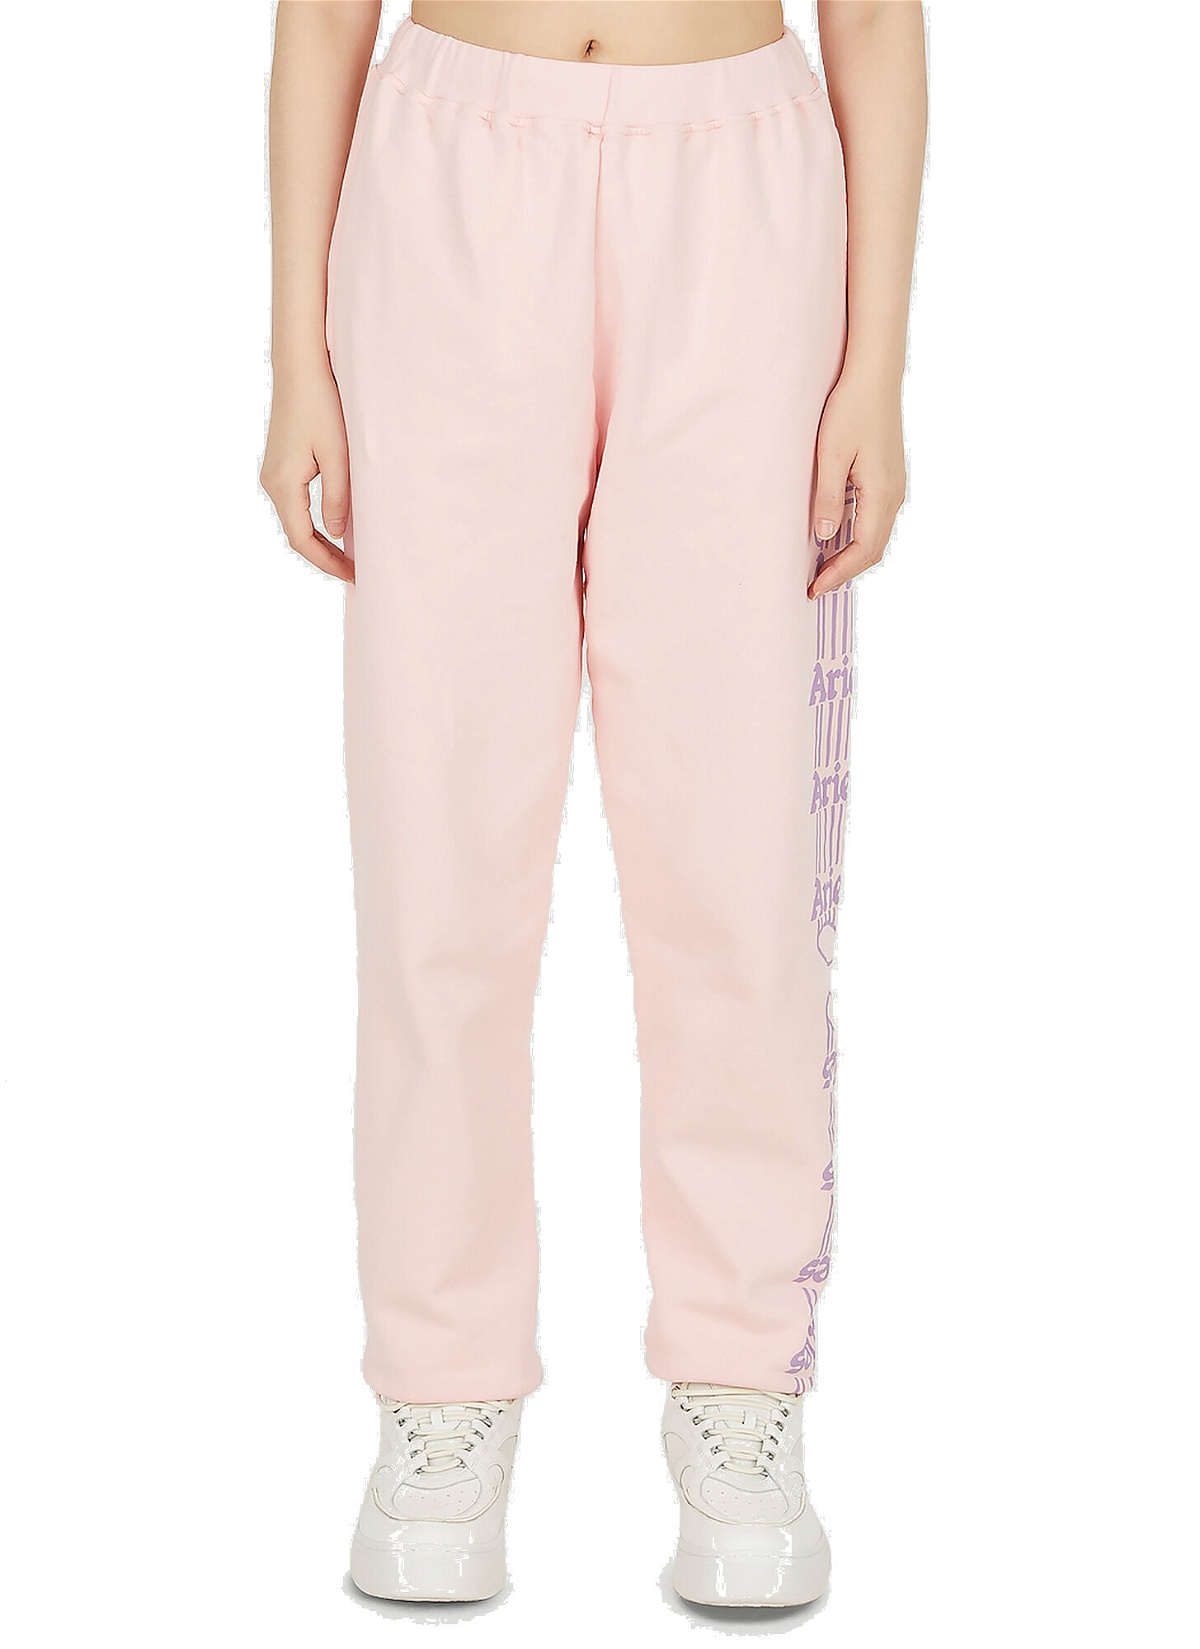 Aries Pink Ombre Dyed Windcheater Track Pants ARIES